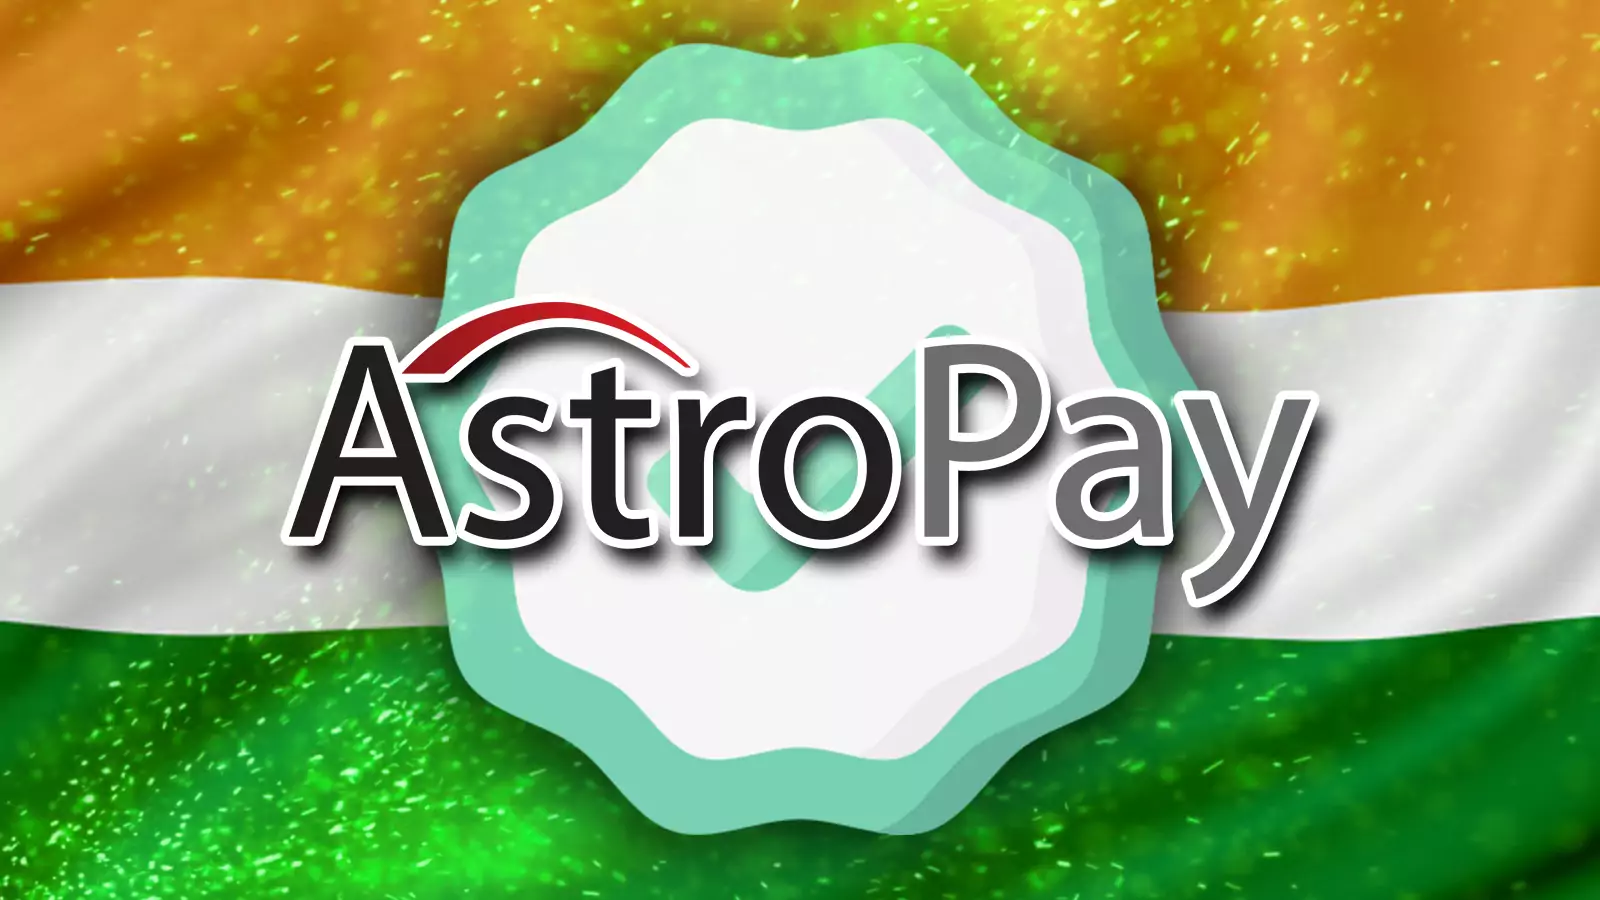 You can use Astropay deposit and be sure that you don't break any Indian laws.